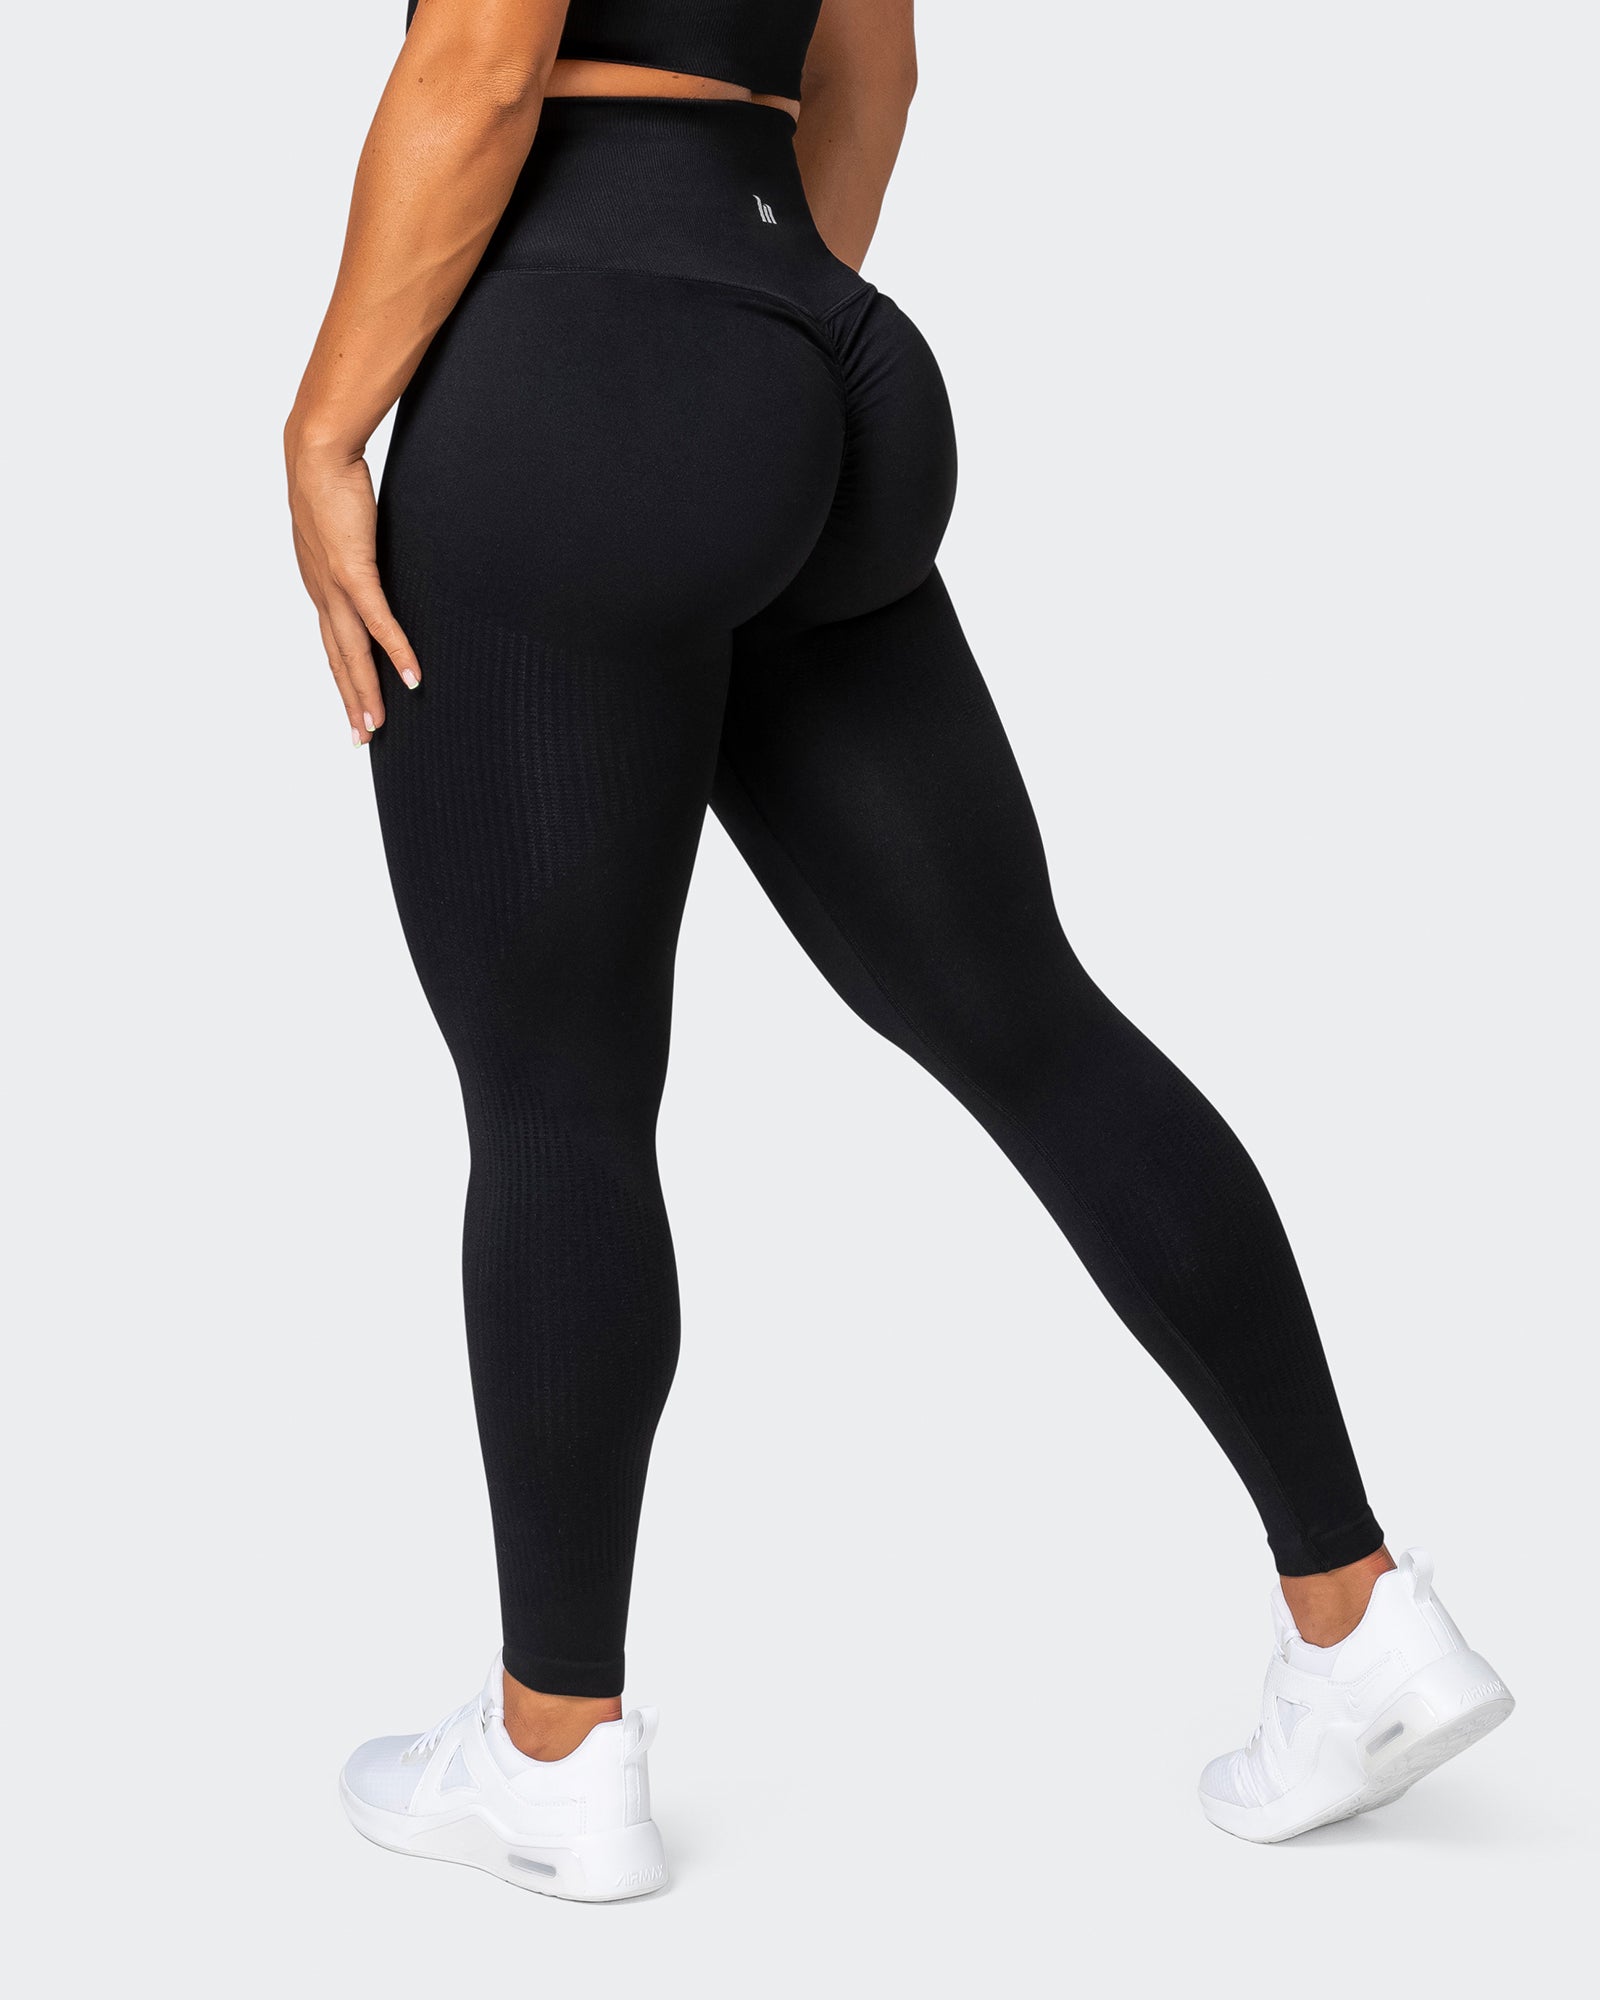 LIGHTBACK Women's Workout Leggings High Waisted Stretchy Leggings Soft  Ankle Length Yoga Pants Gym Tights Black at Amazon Women's Clothing store